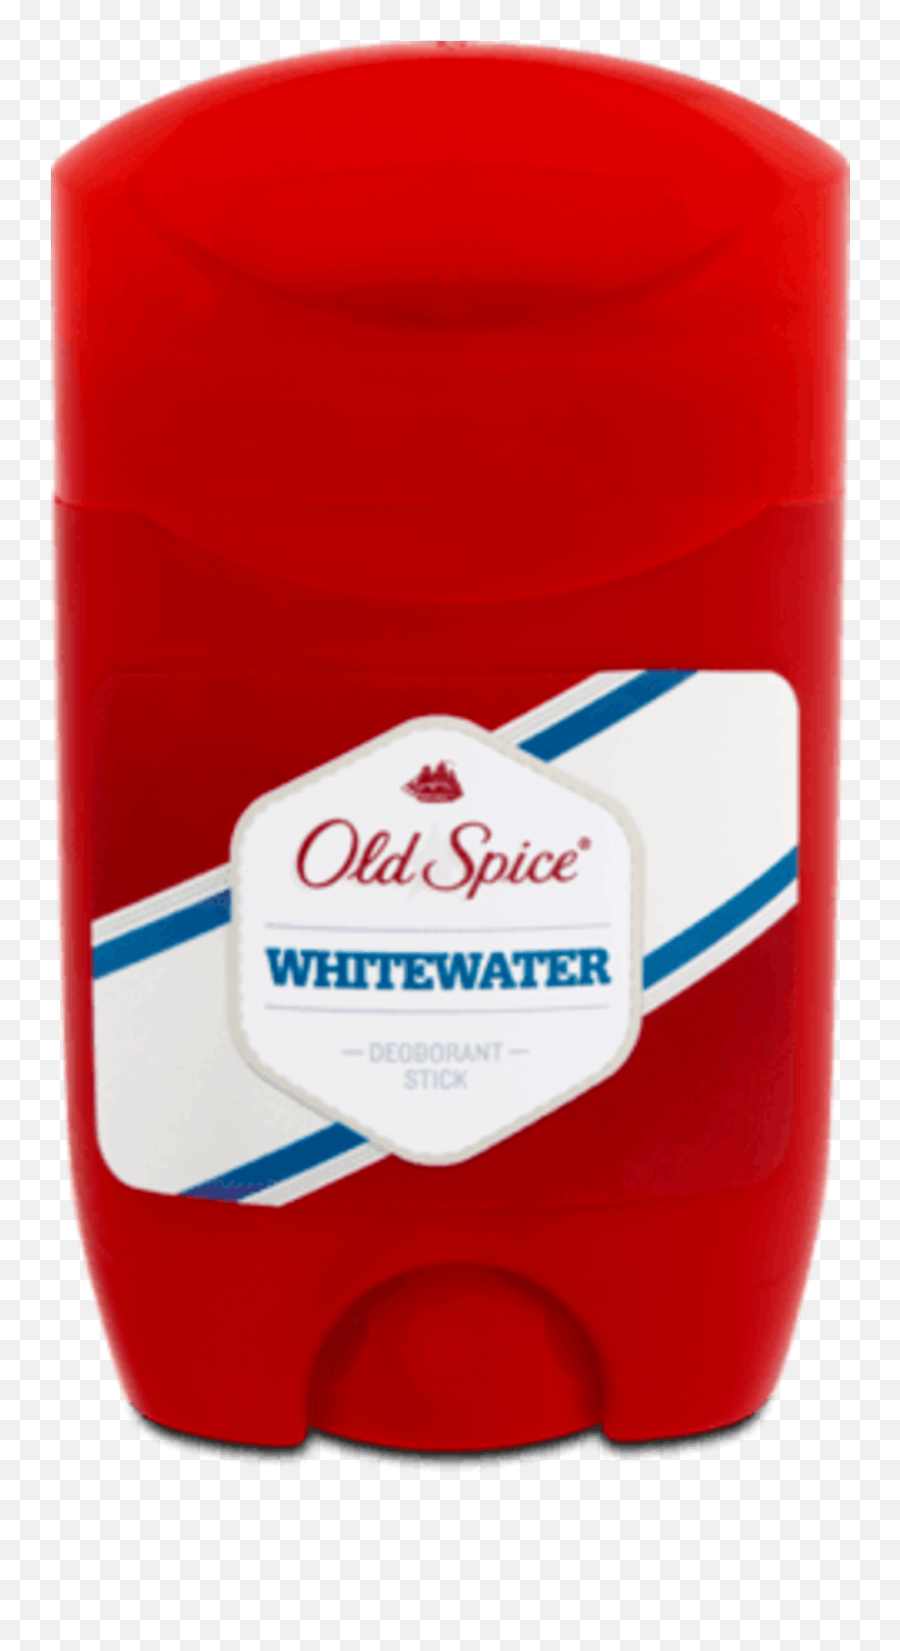 Old Spice Deodorant Stick Whitewater Png